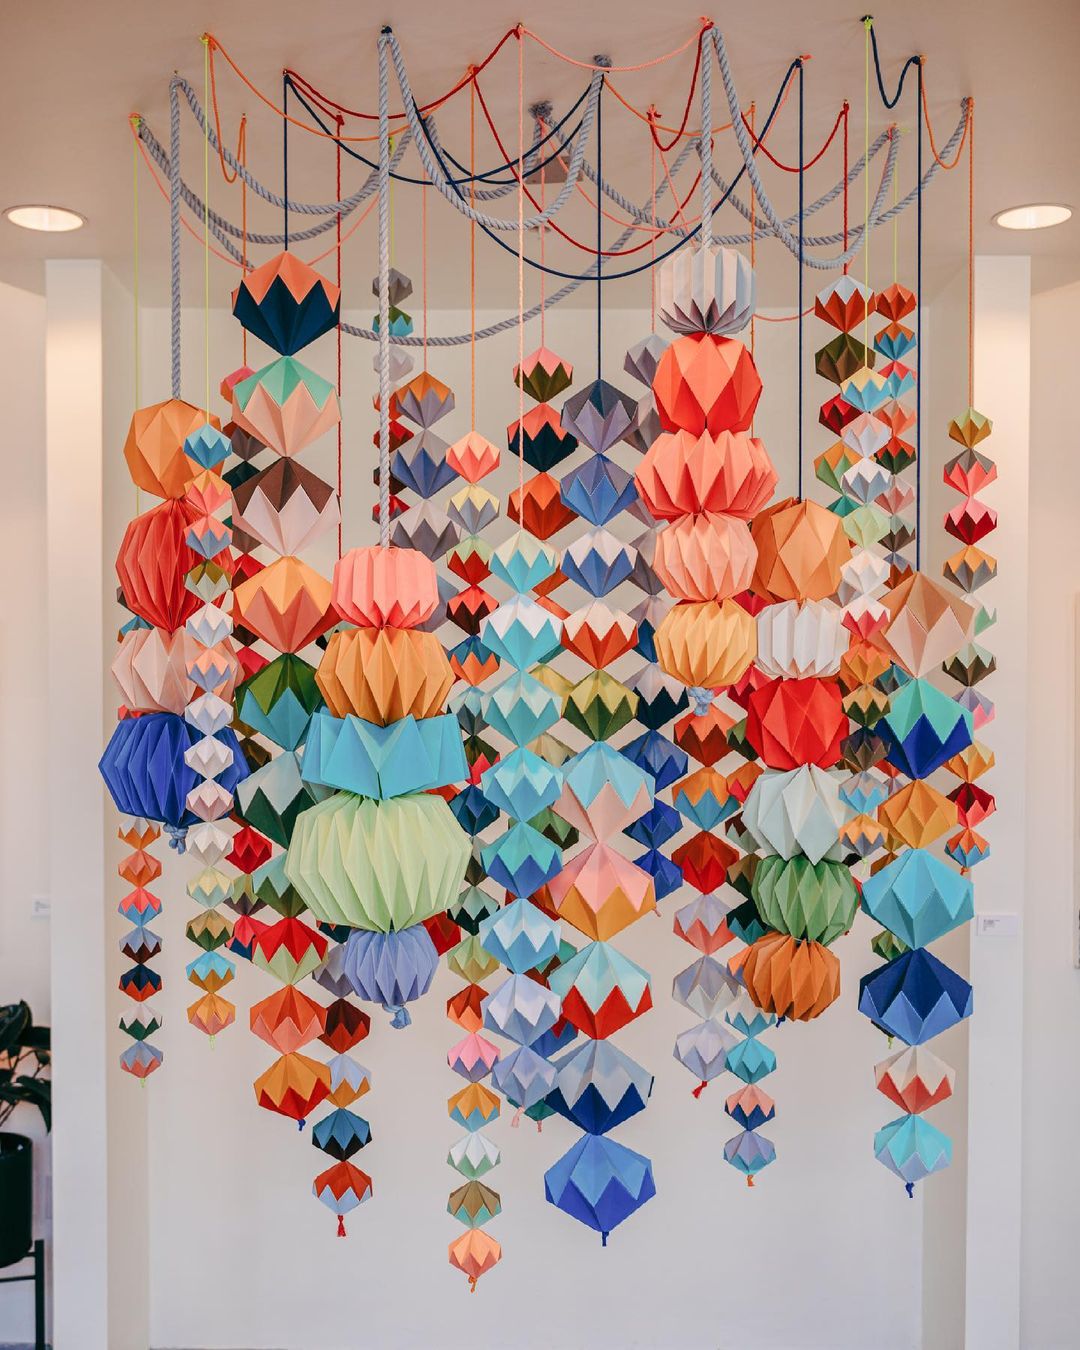 Paper art installation by The Paper Committee (photo by @taramoon)